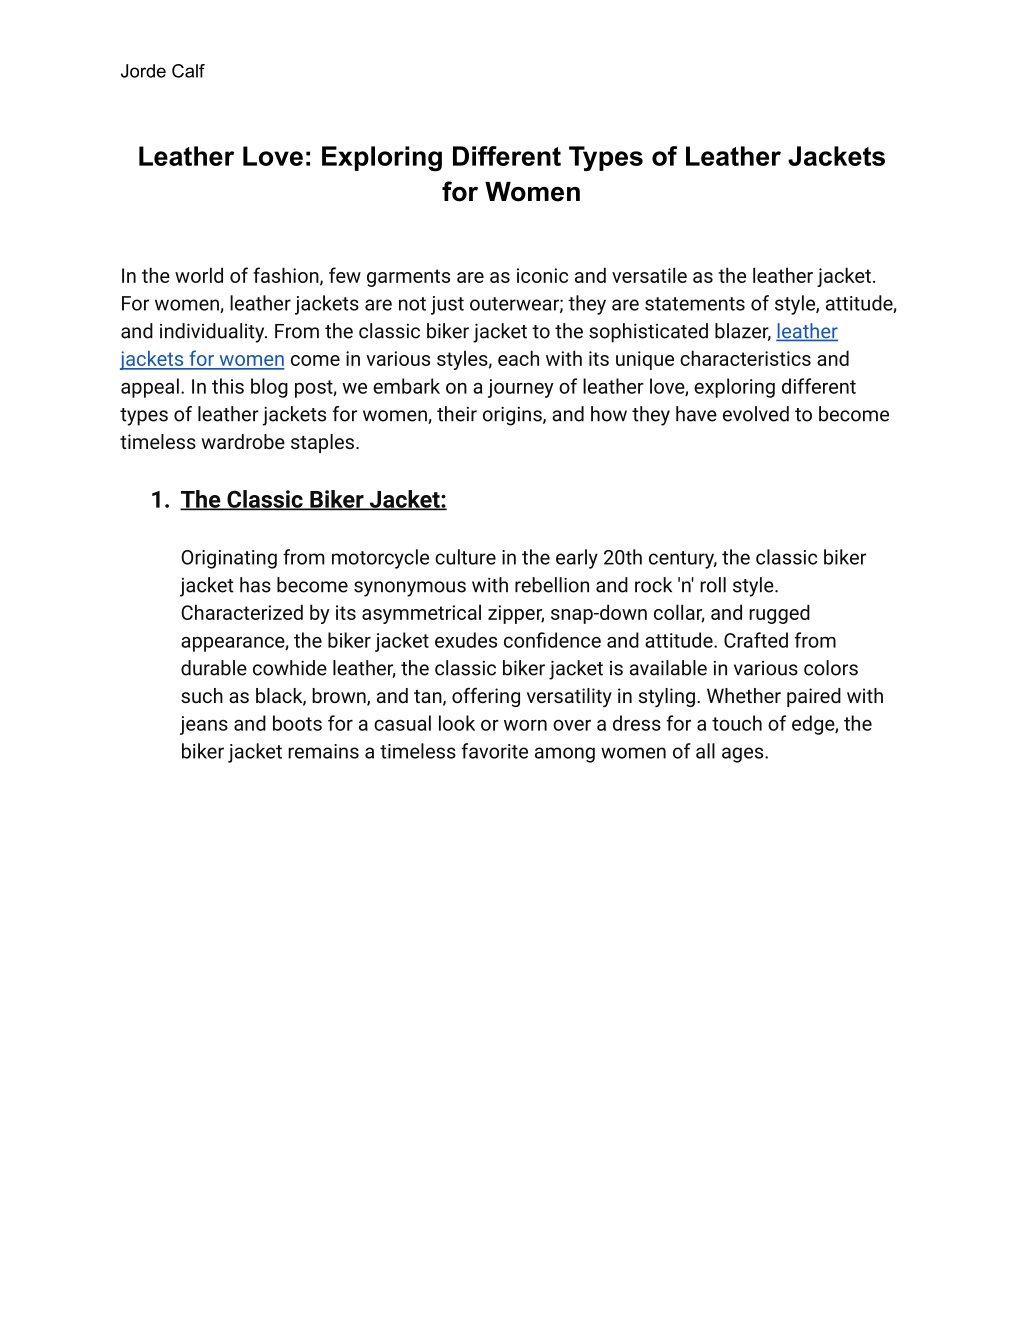 PPT - Leather Love_ Exploring Different Types of Leather Jackets for ...